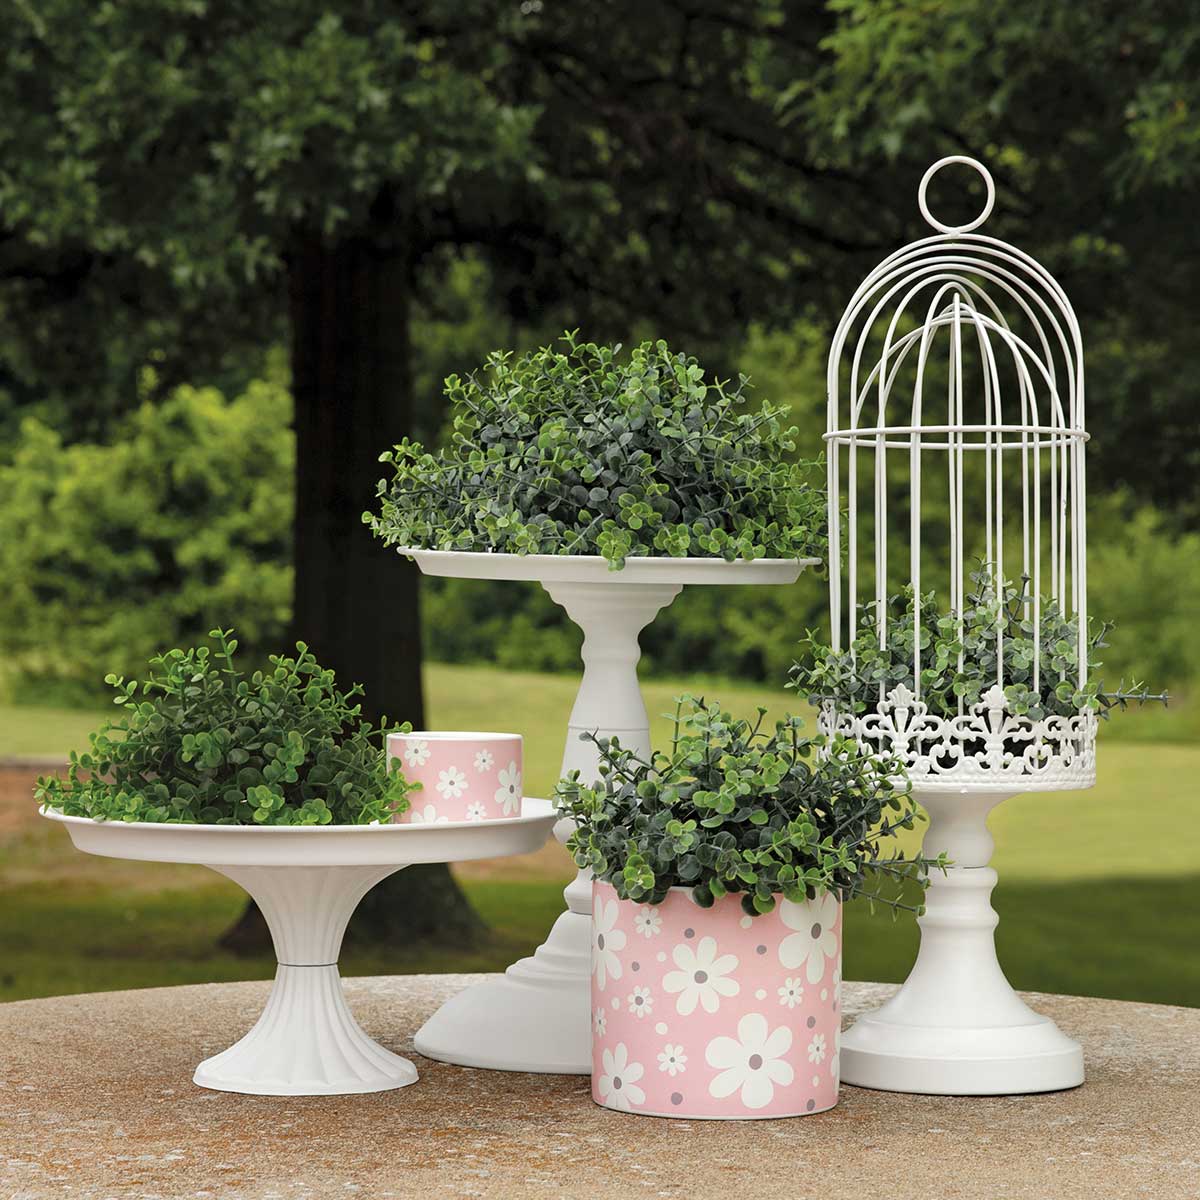 BIRD CAGE WITH REMOVEABLE TOP 6IN X 20.5IN METAL